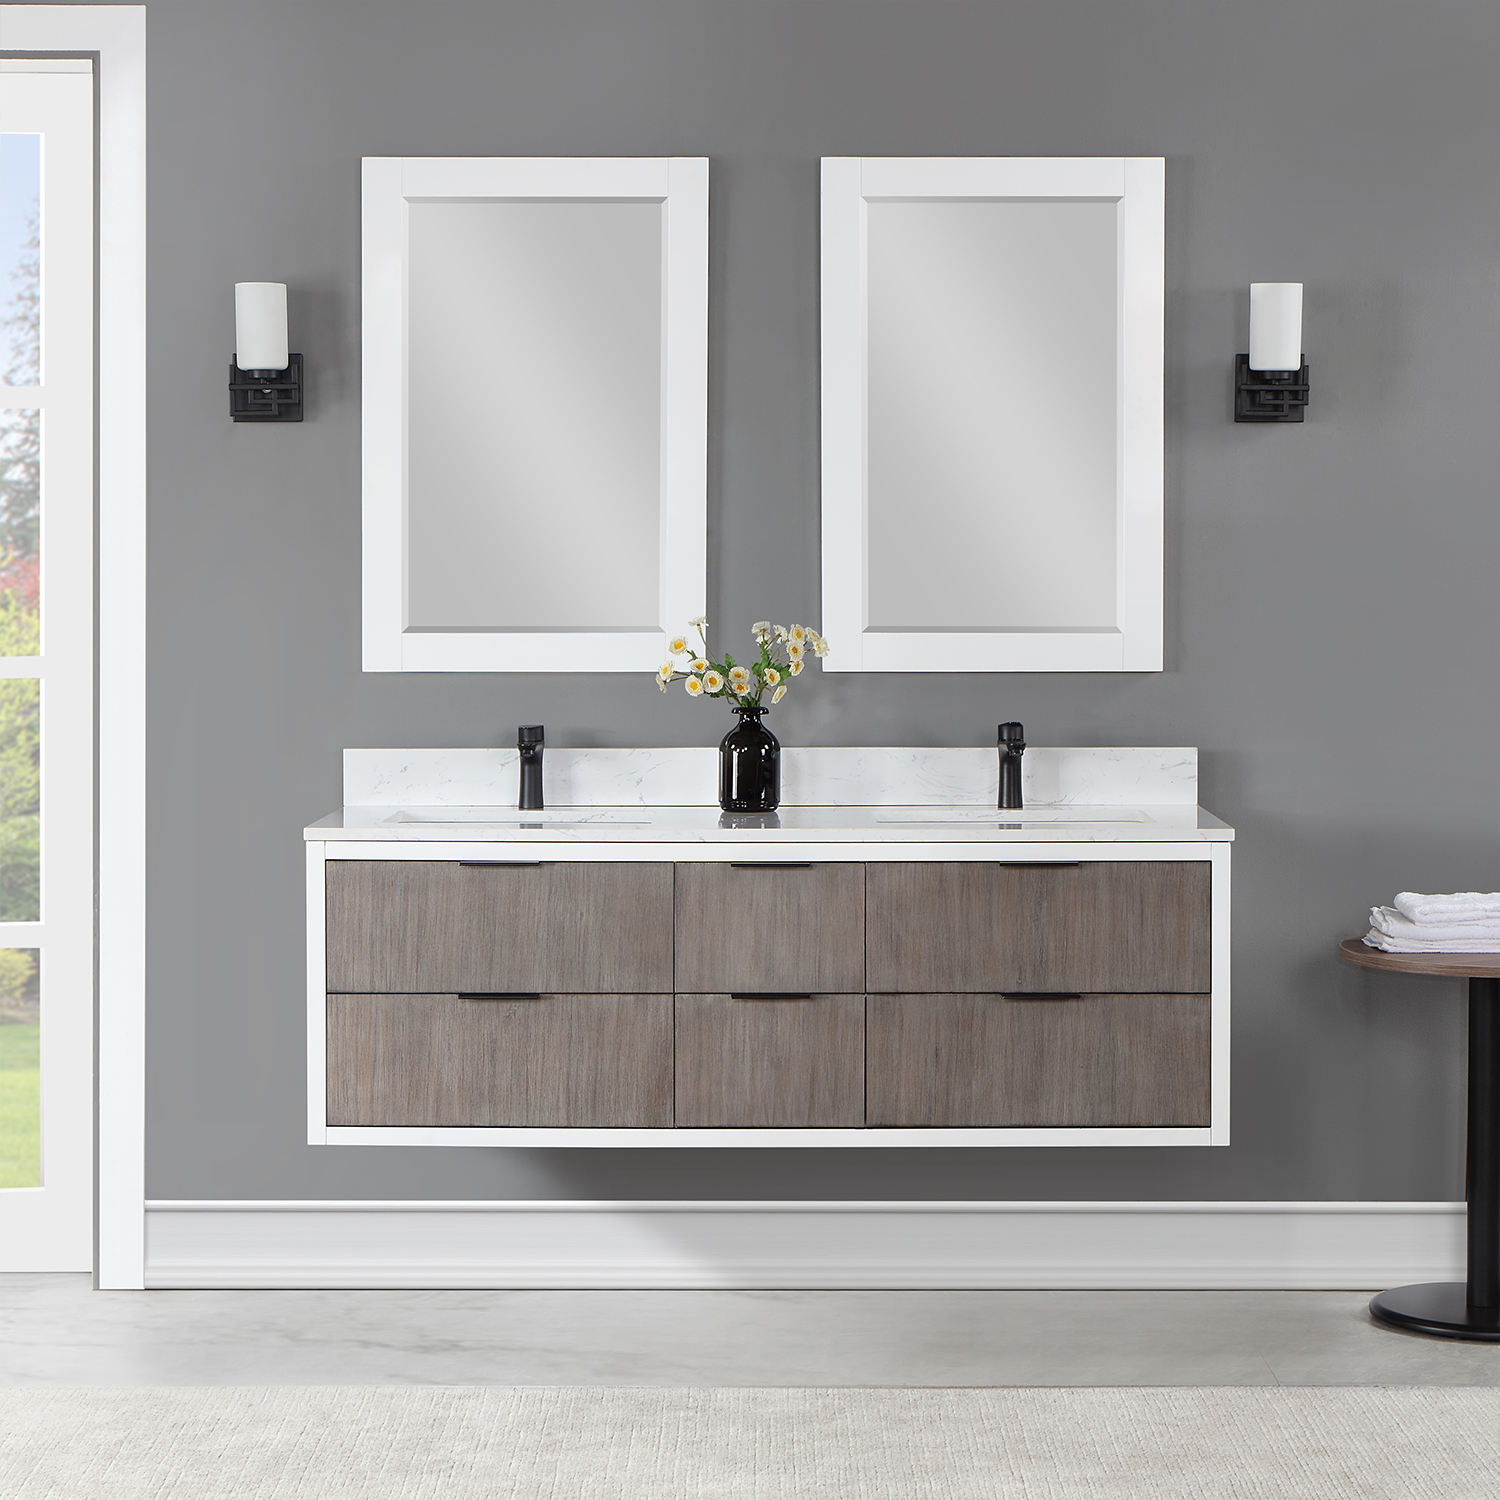 Issac Edwards Collection 60" Double Bathroom Vanity in Classical Gray with Carrara White Composite Stone Countertop without Mirror